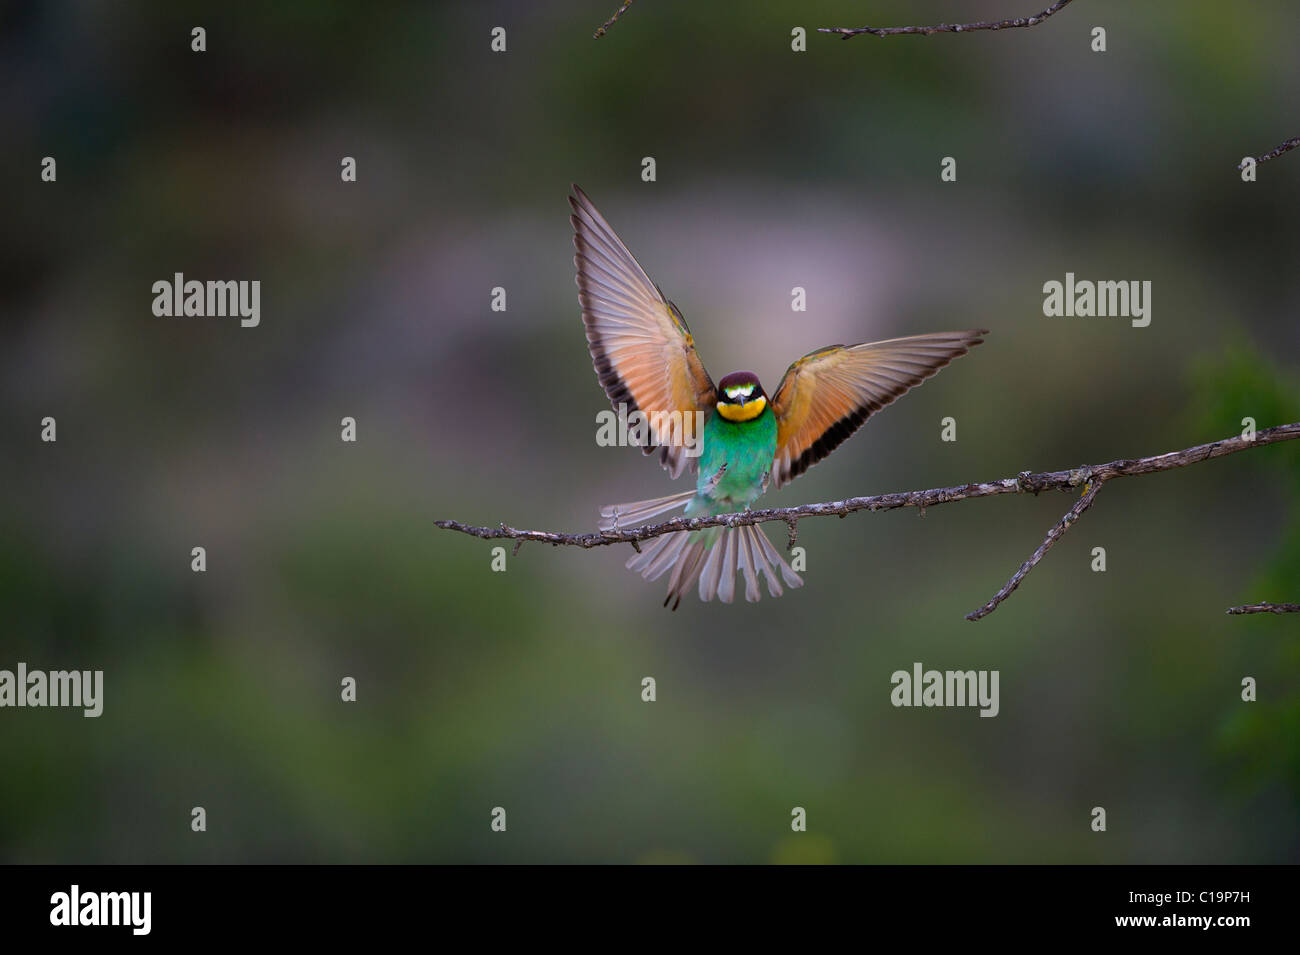 Bee-eater Merops apiaster Spanish Steppes Spain May Stock Photo